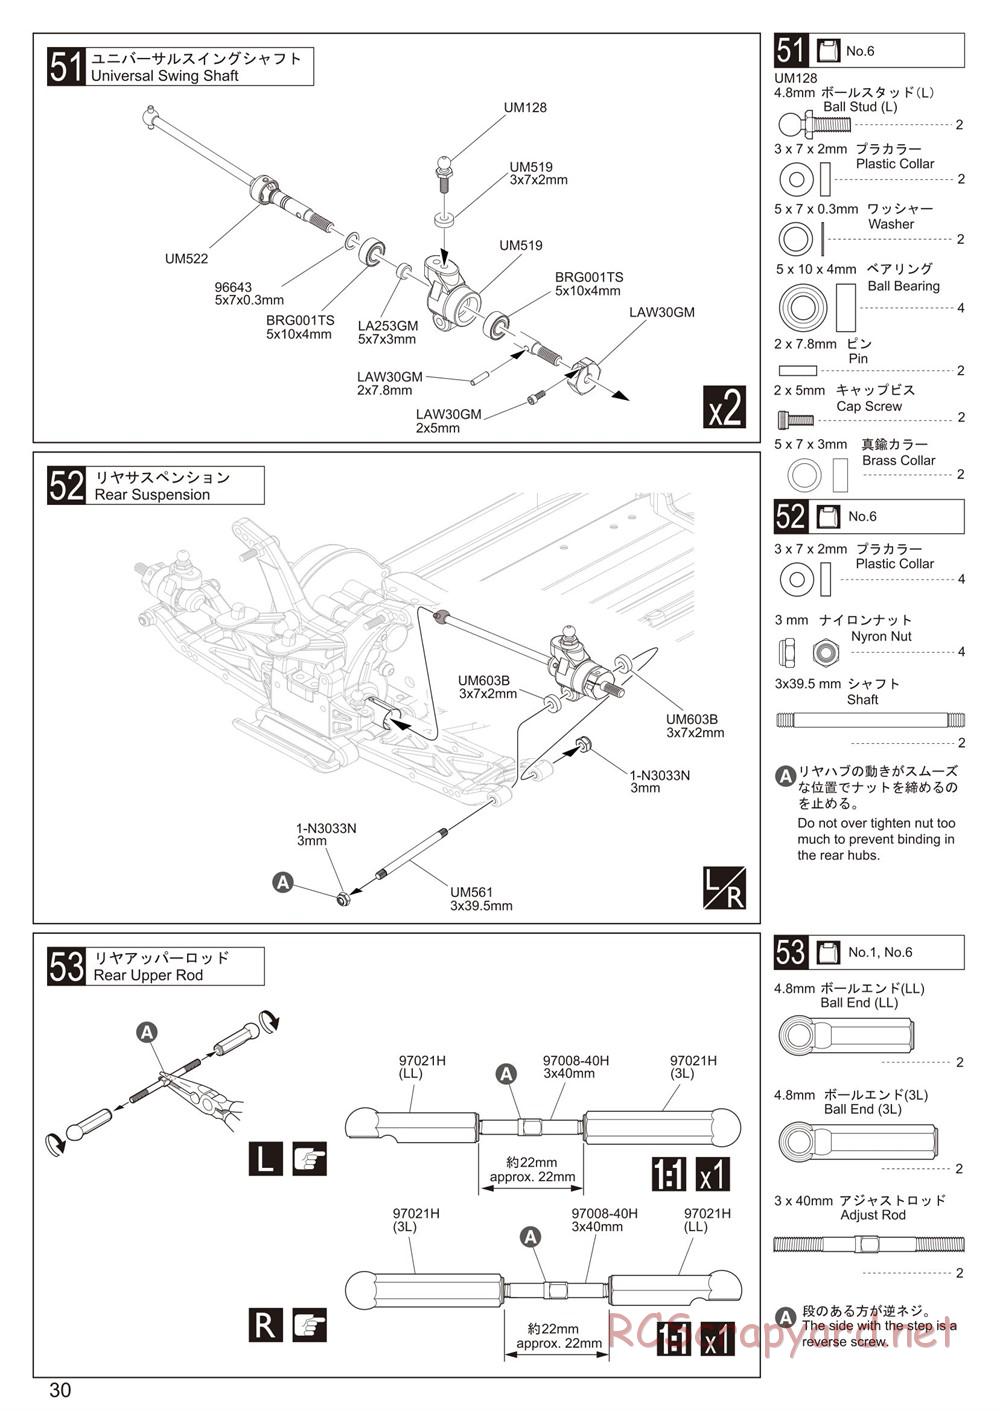 Kyosho - Ultima RB6.6 - Manual - Page 30